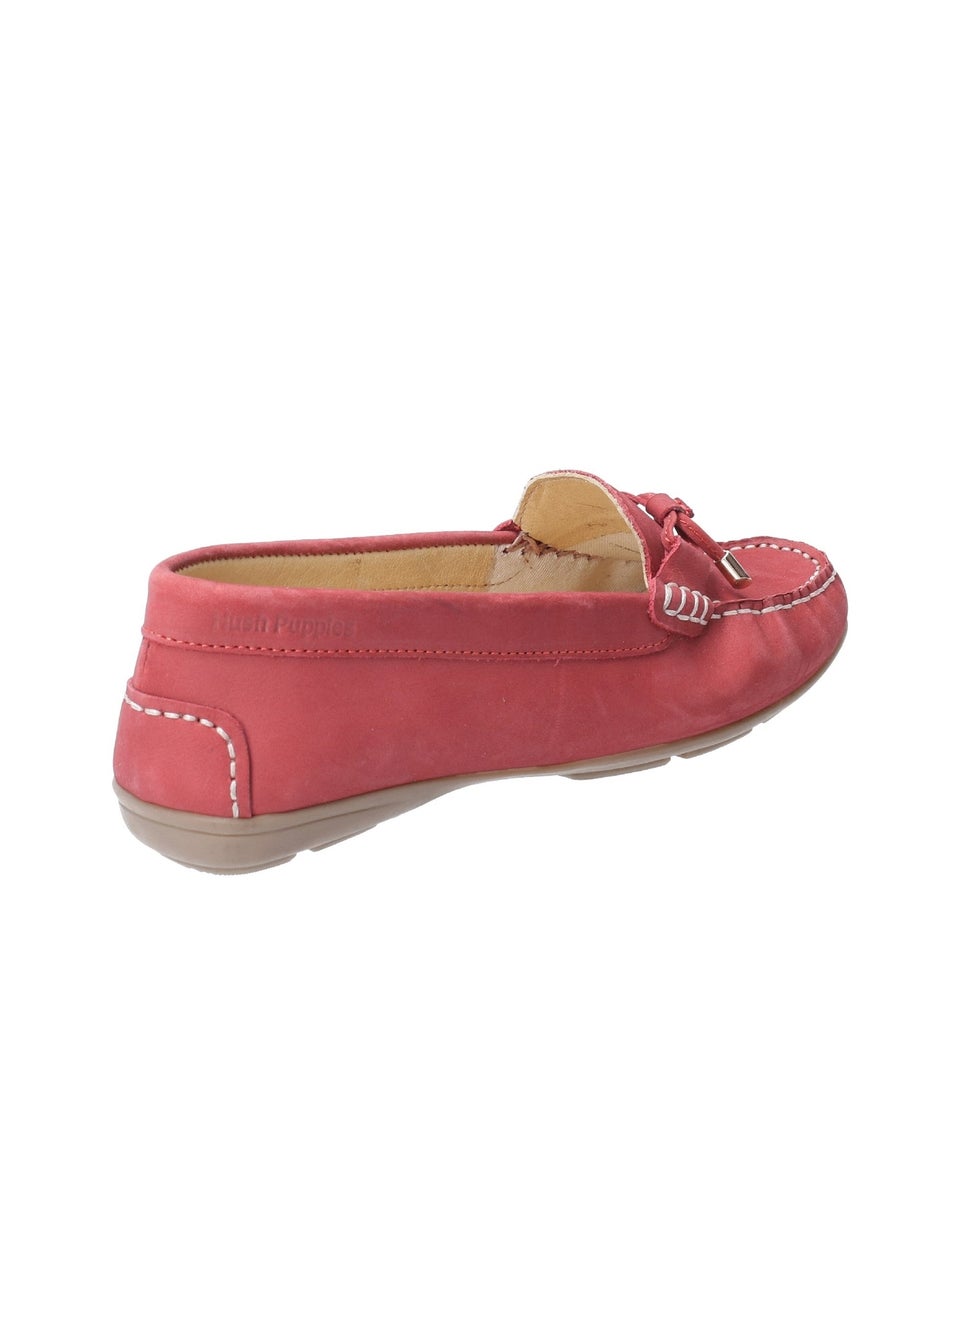 Hush Puppies Red Maggie Toggle Shoe